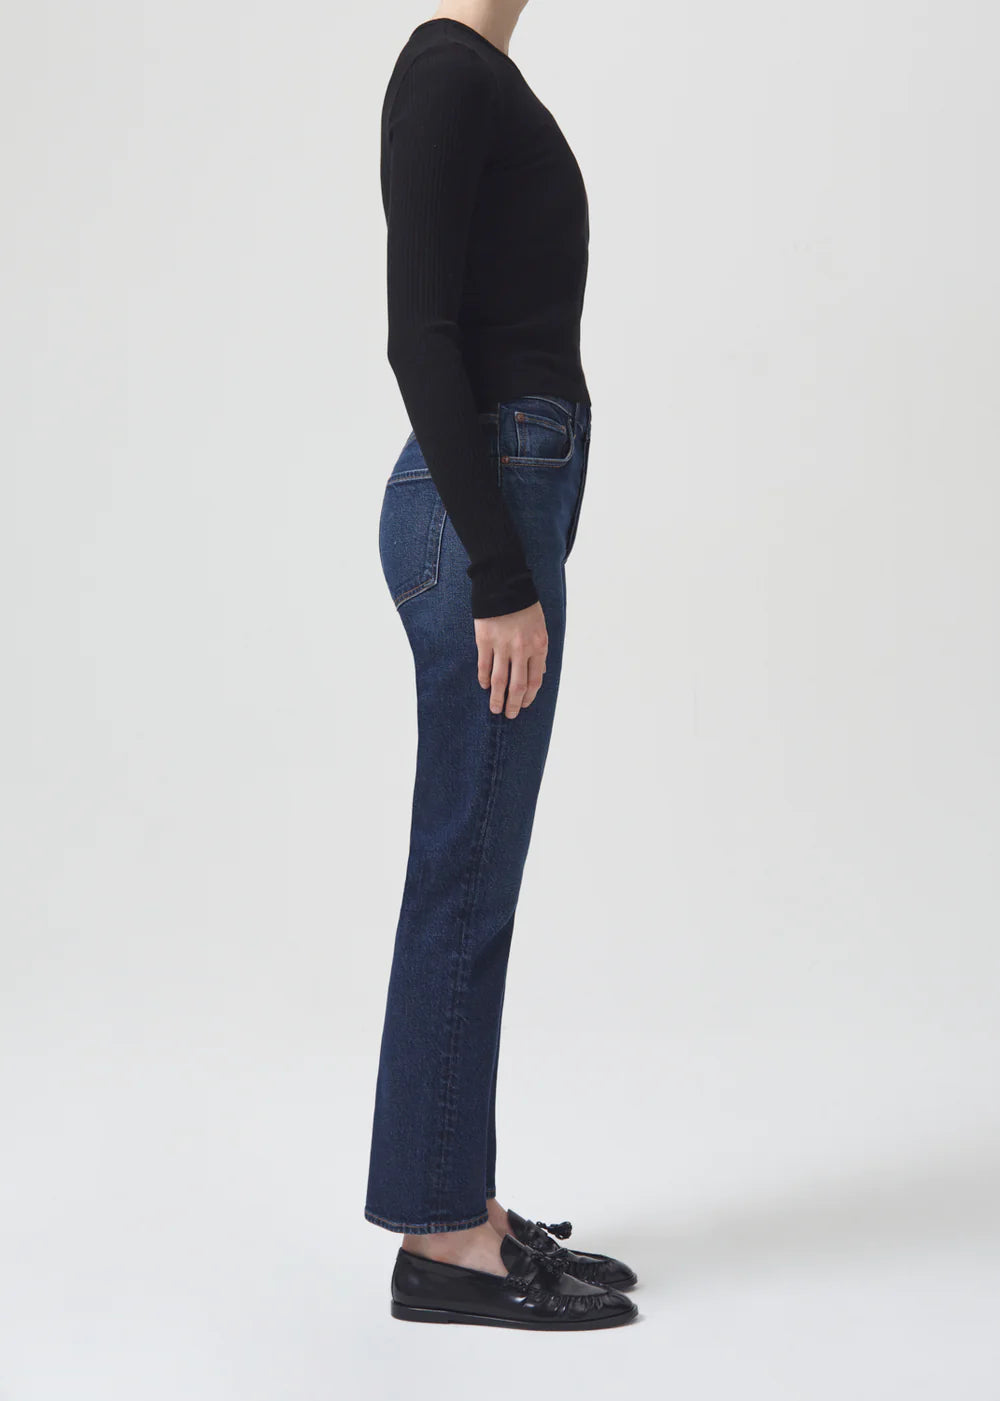 A woman wearing AGOLDE Riley Straight Long - Divided high-rise black jeans and a black sweater.